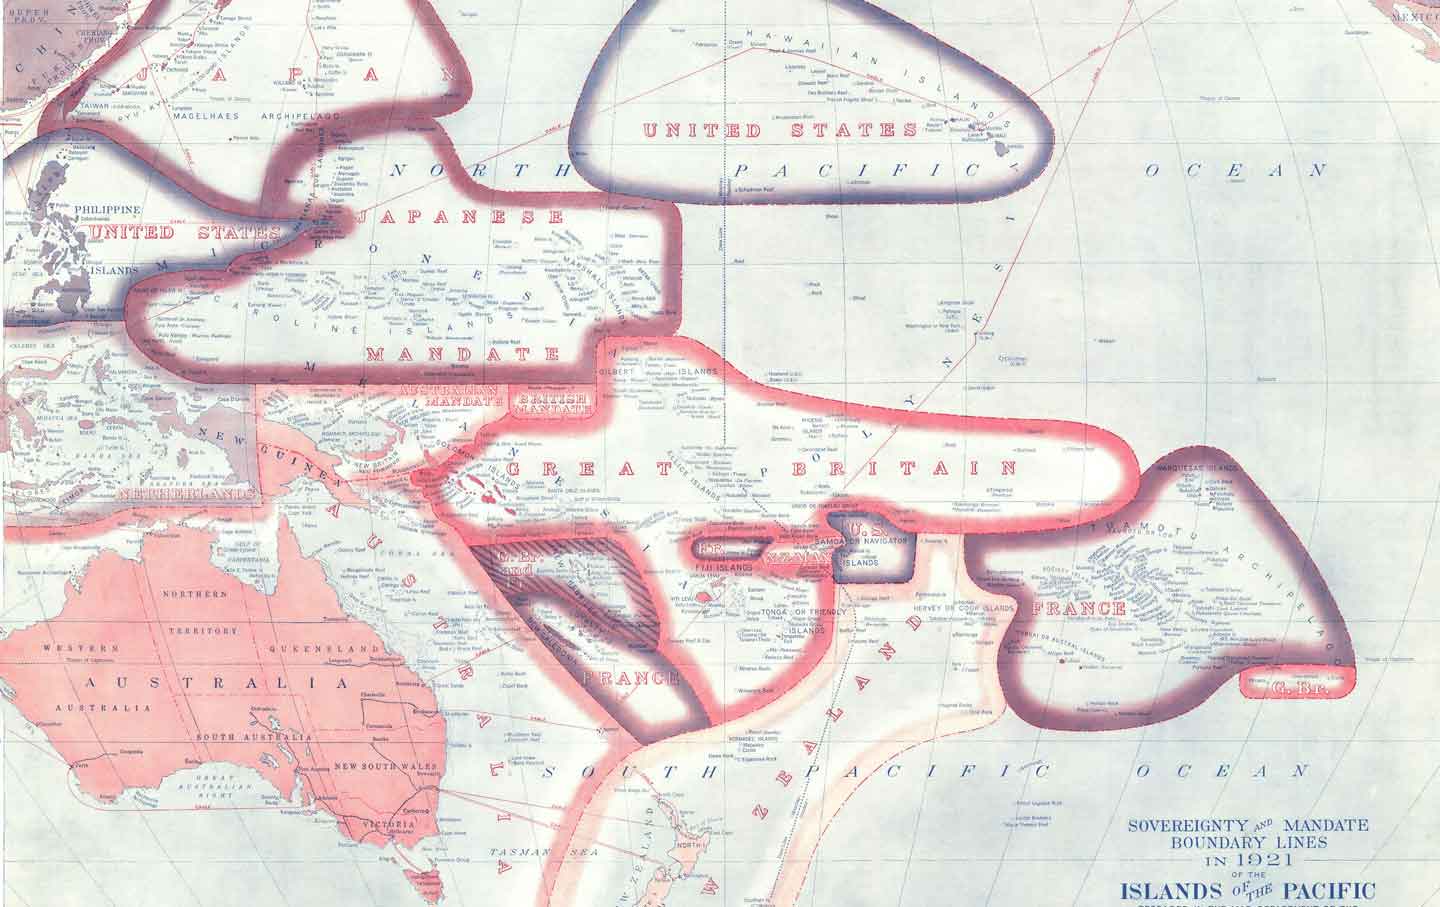 Mandate boundary lines in the Pacific islands, 1921.